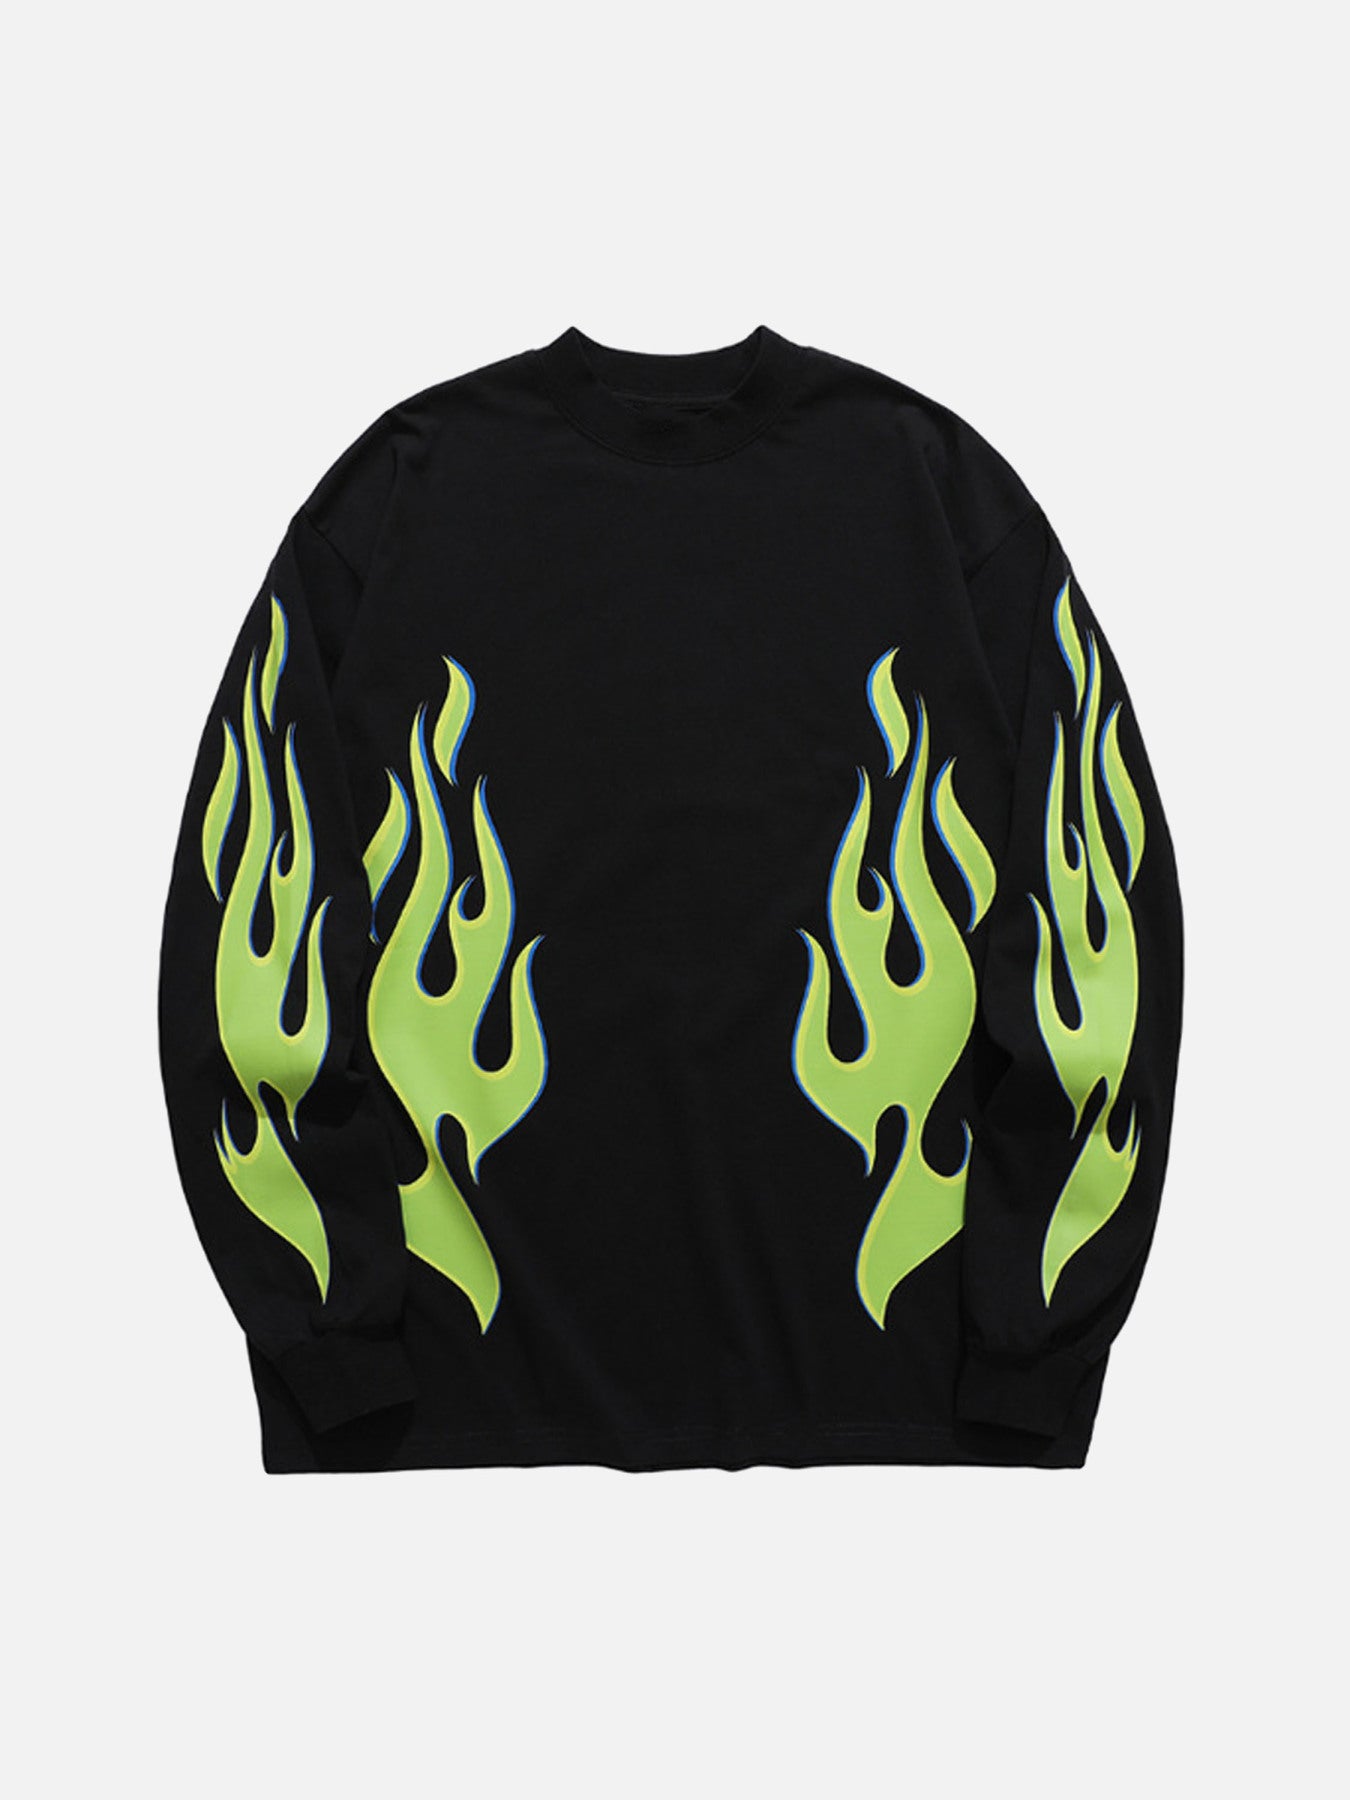 The Supermade Fluorescent Green Fireworks Crew Neck Sweater